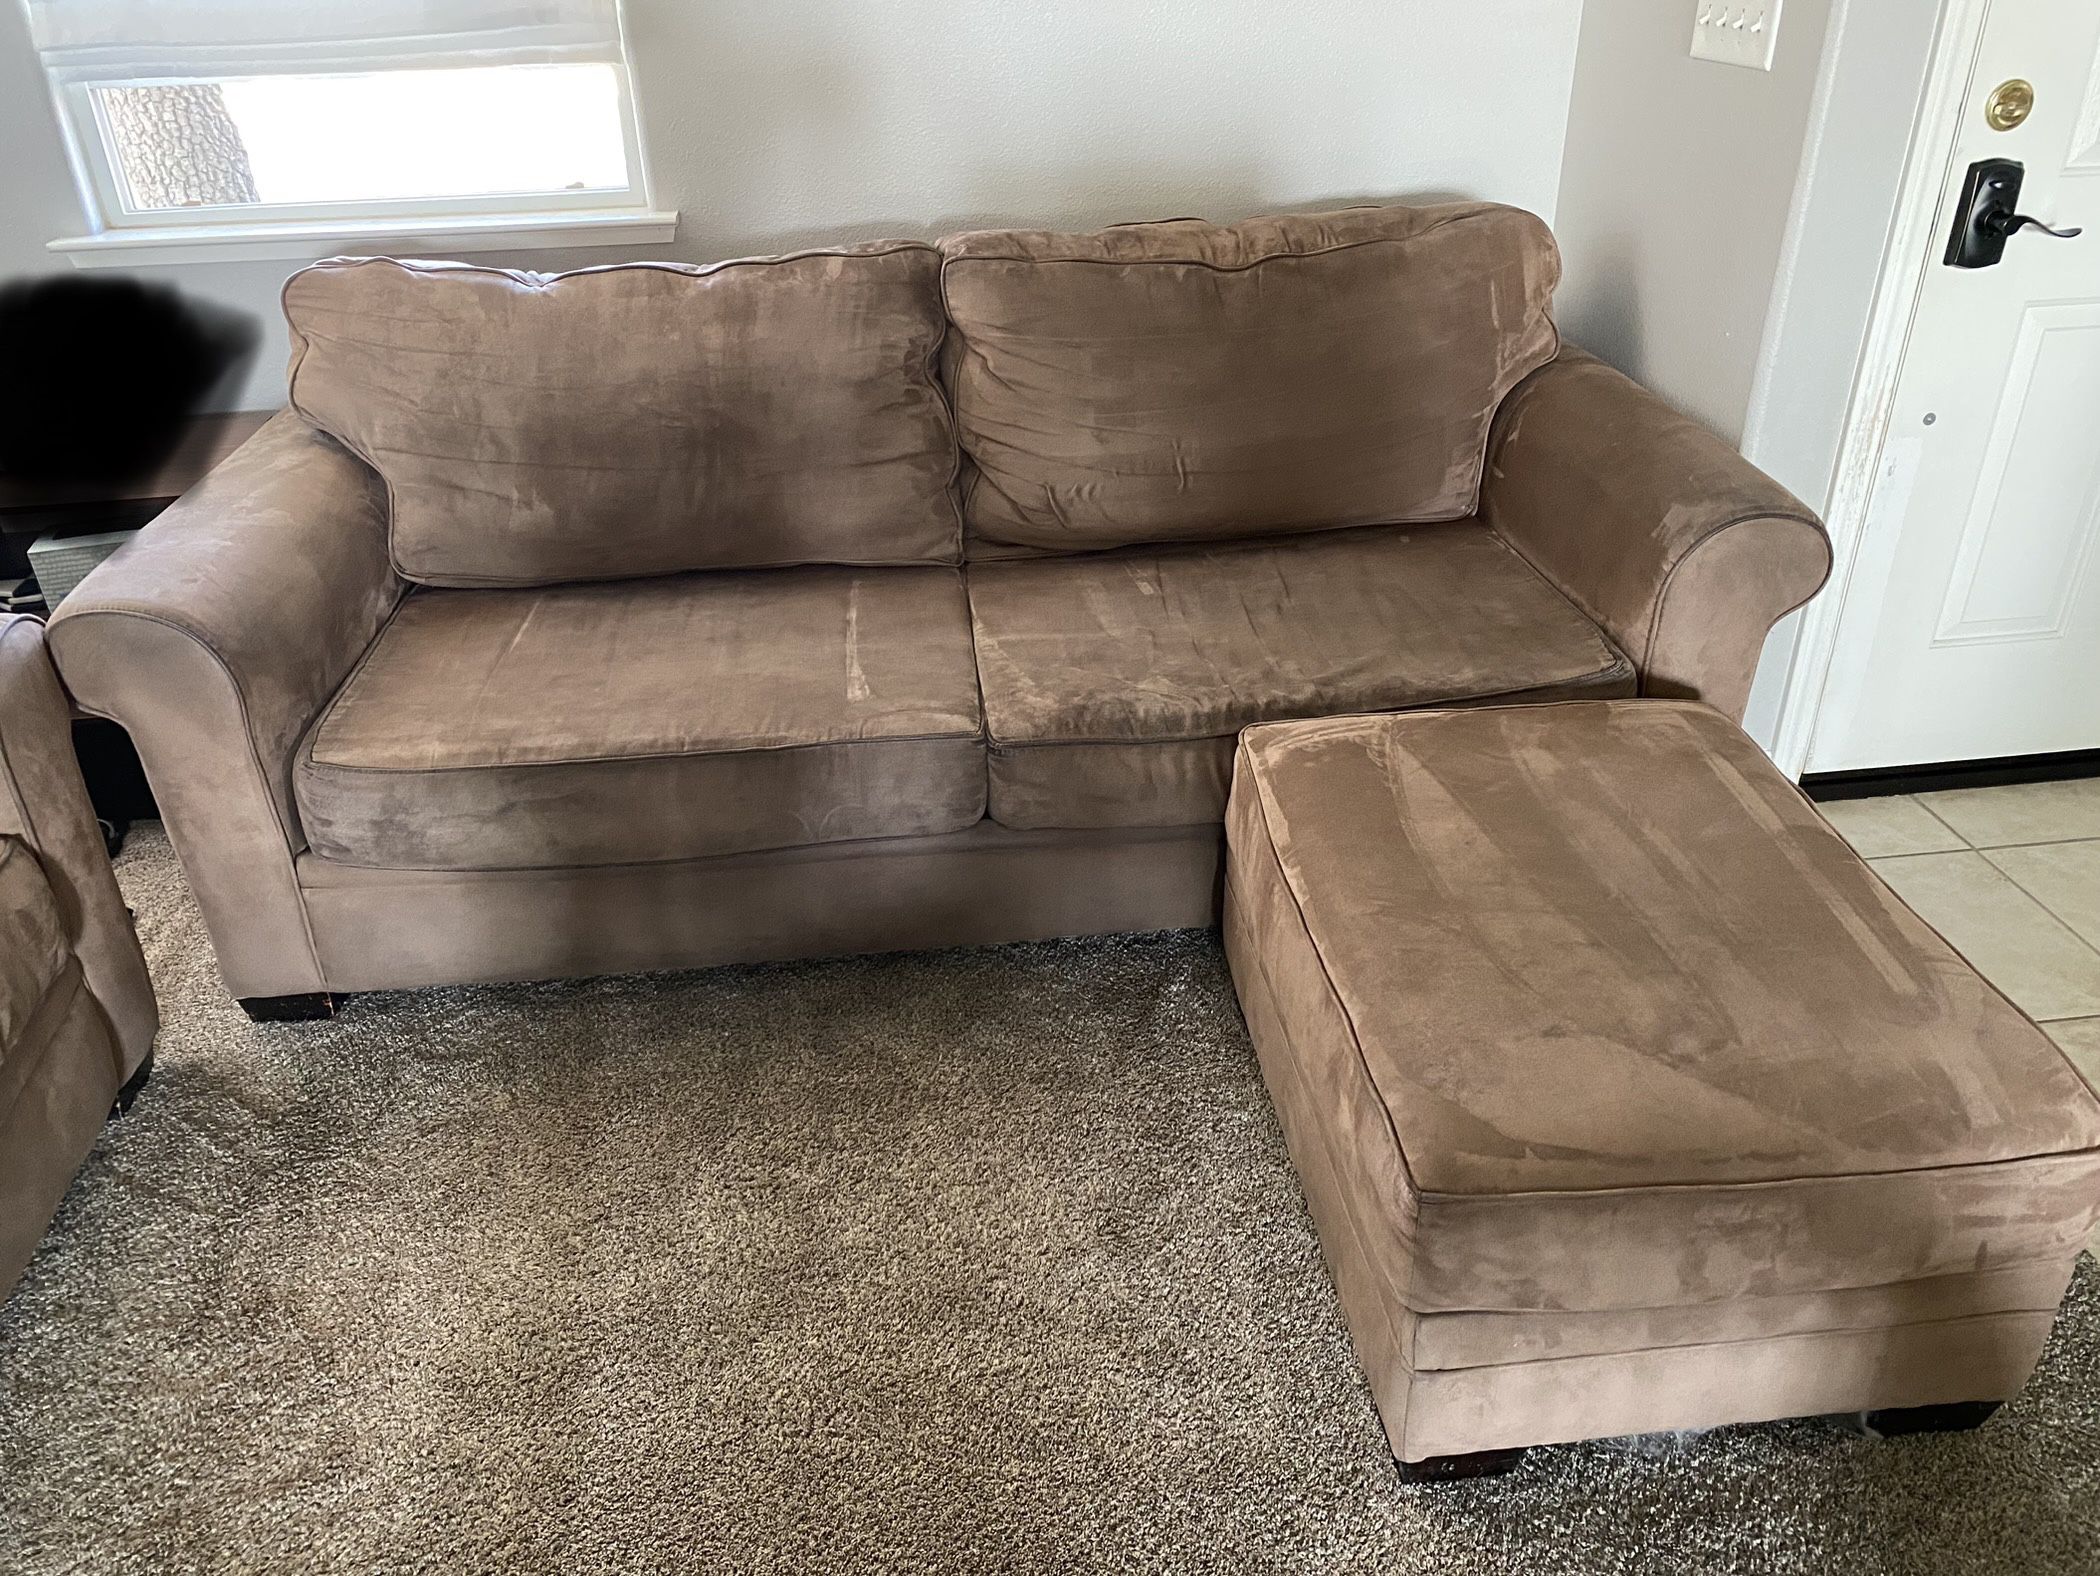 Couch, Ottoman, and Loveseat